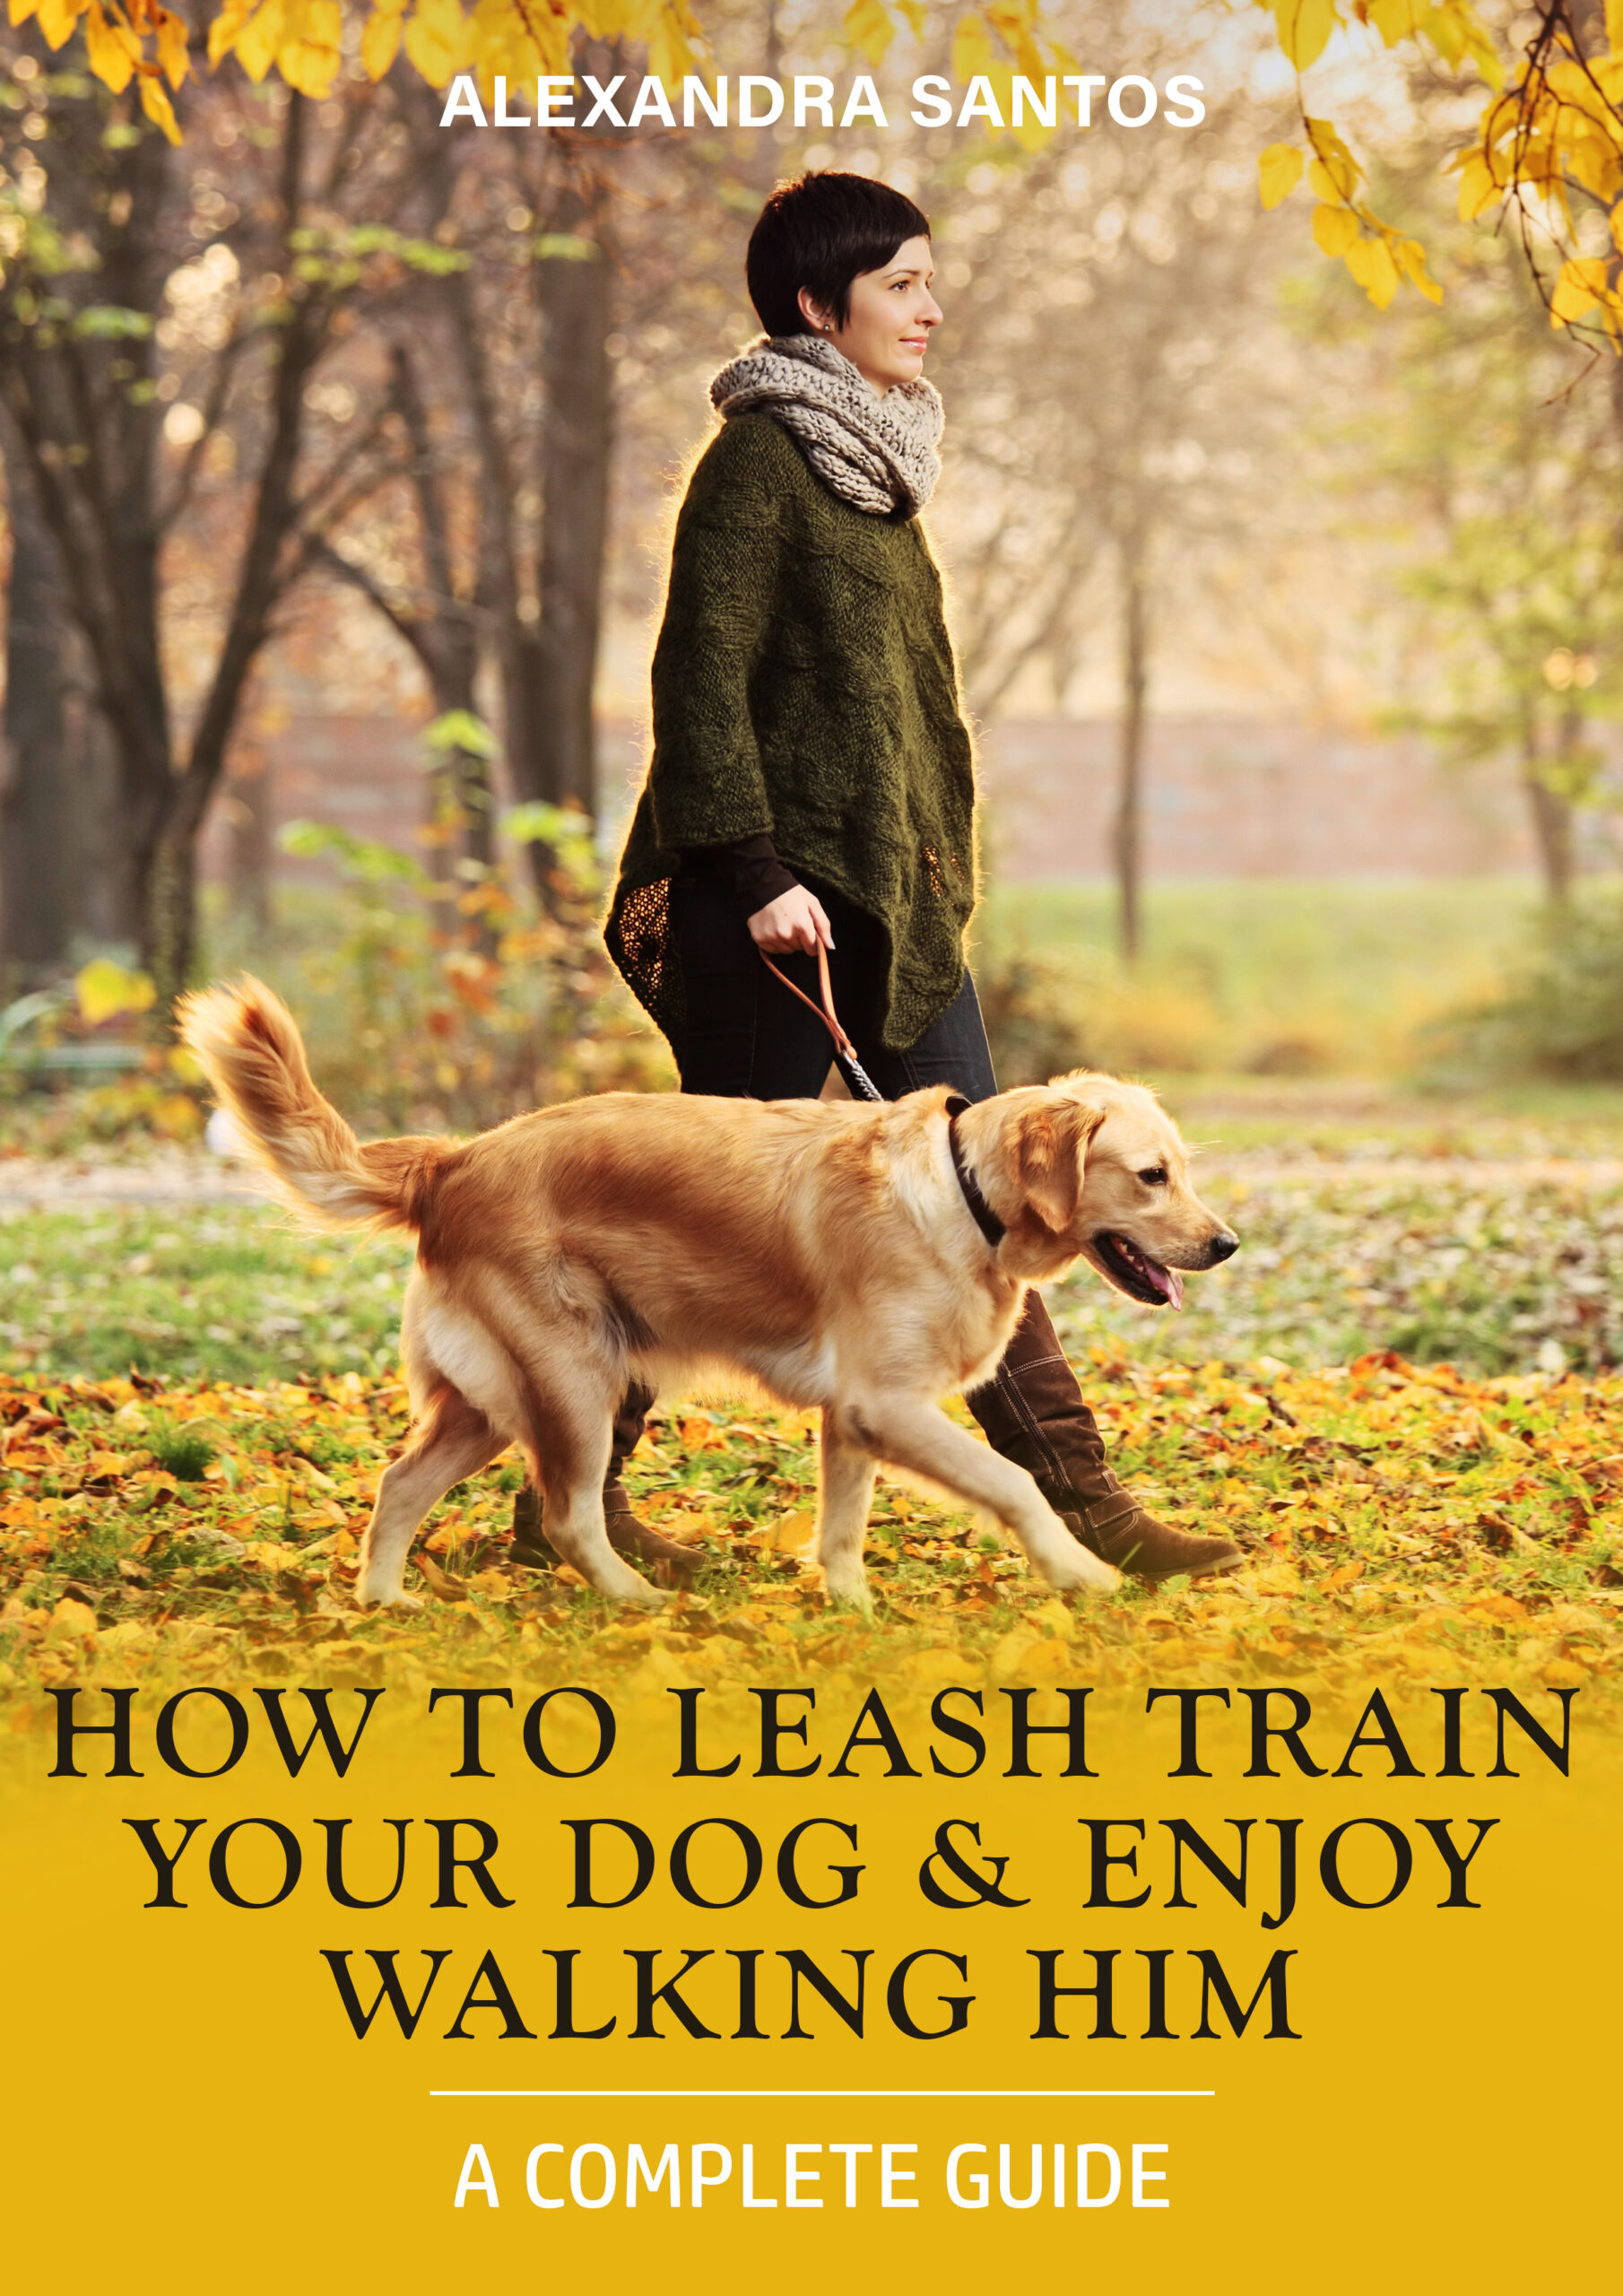 FREE: How To Leash Train Your Dog And Enjoy Walking Him – A Complete Guide by Alexandra Santos